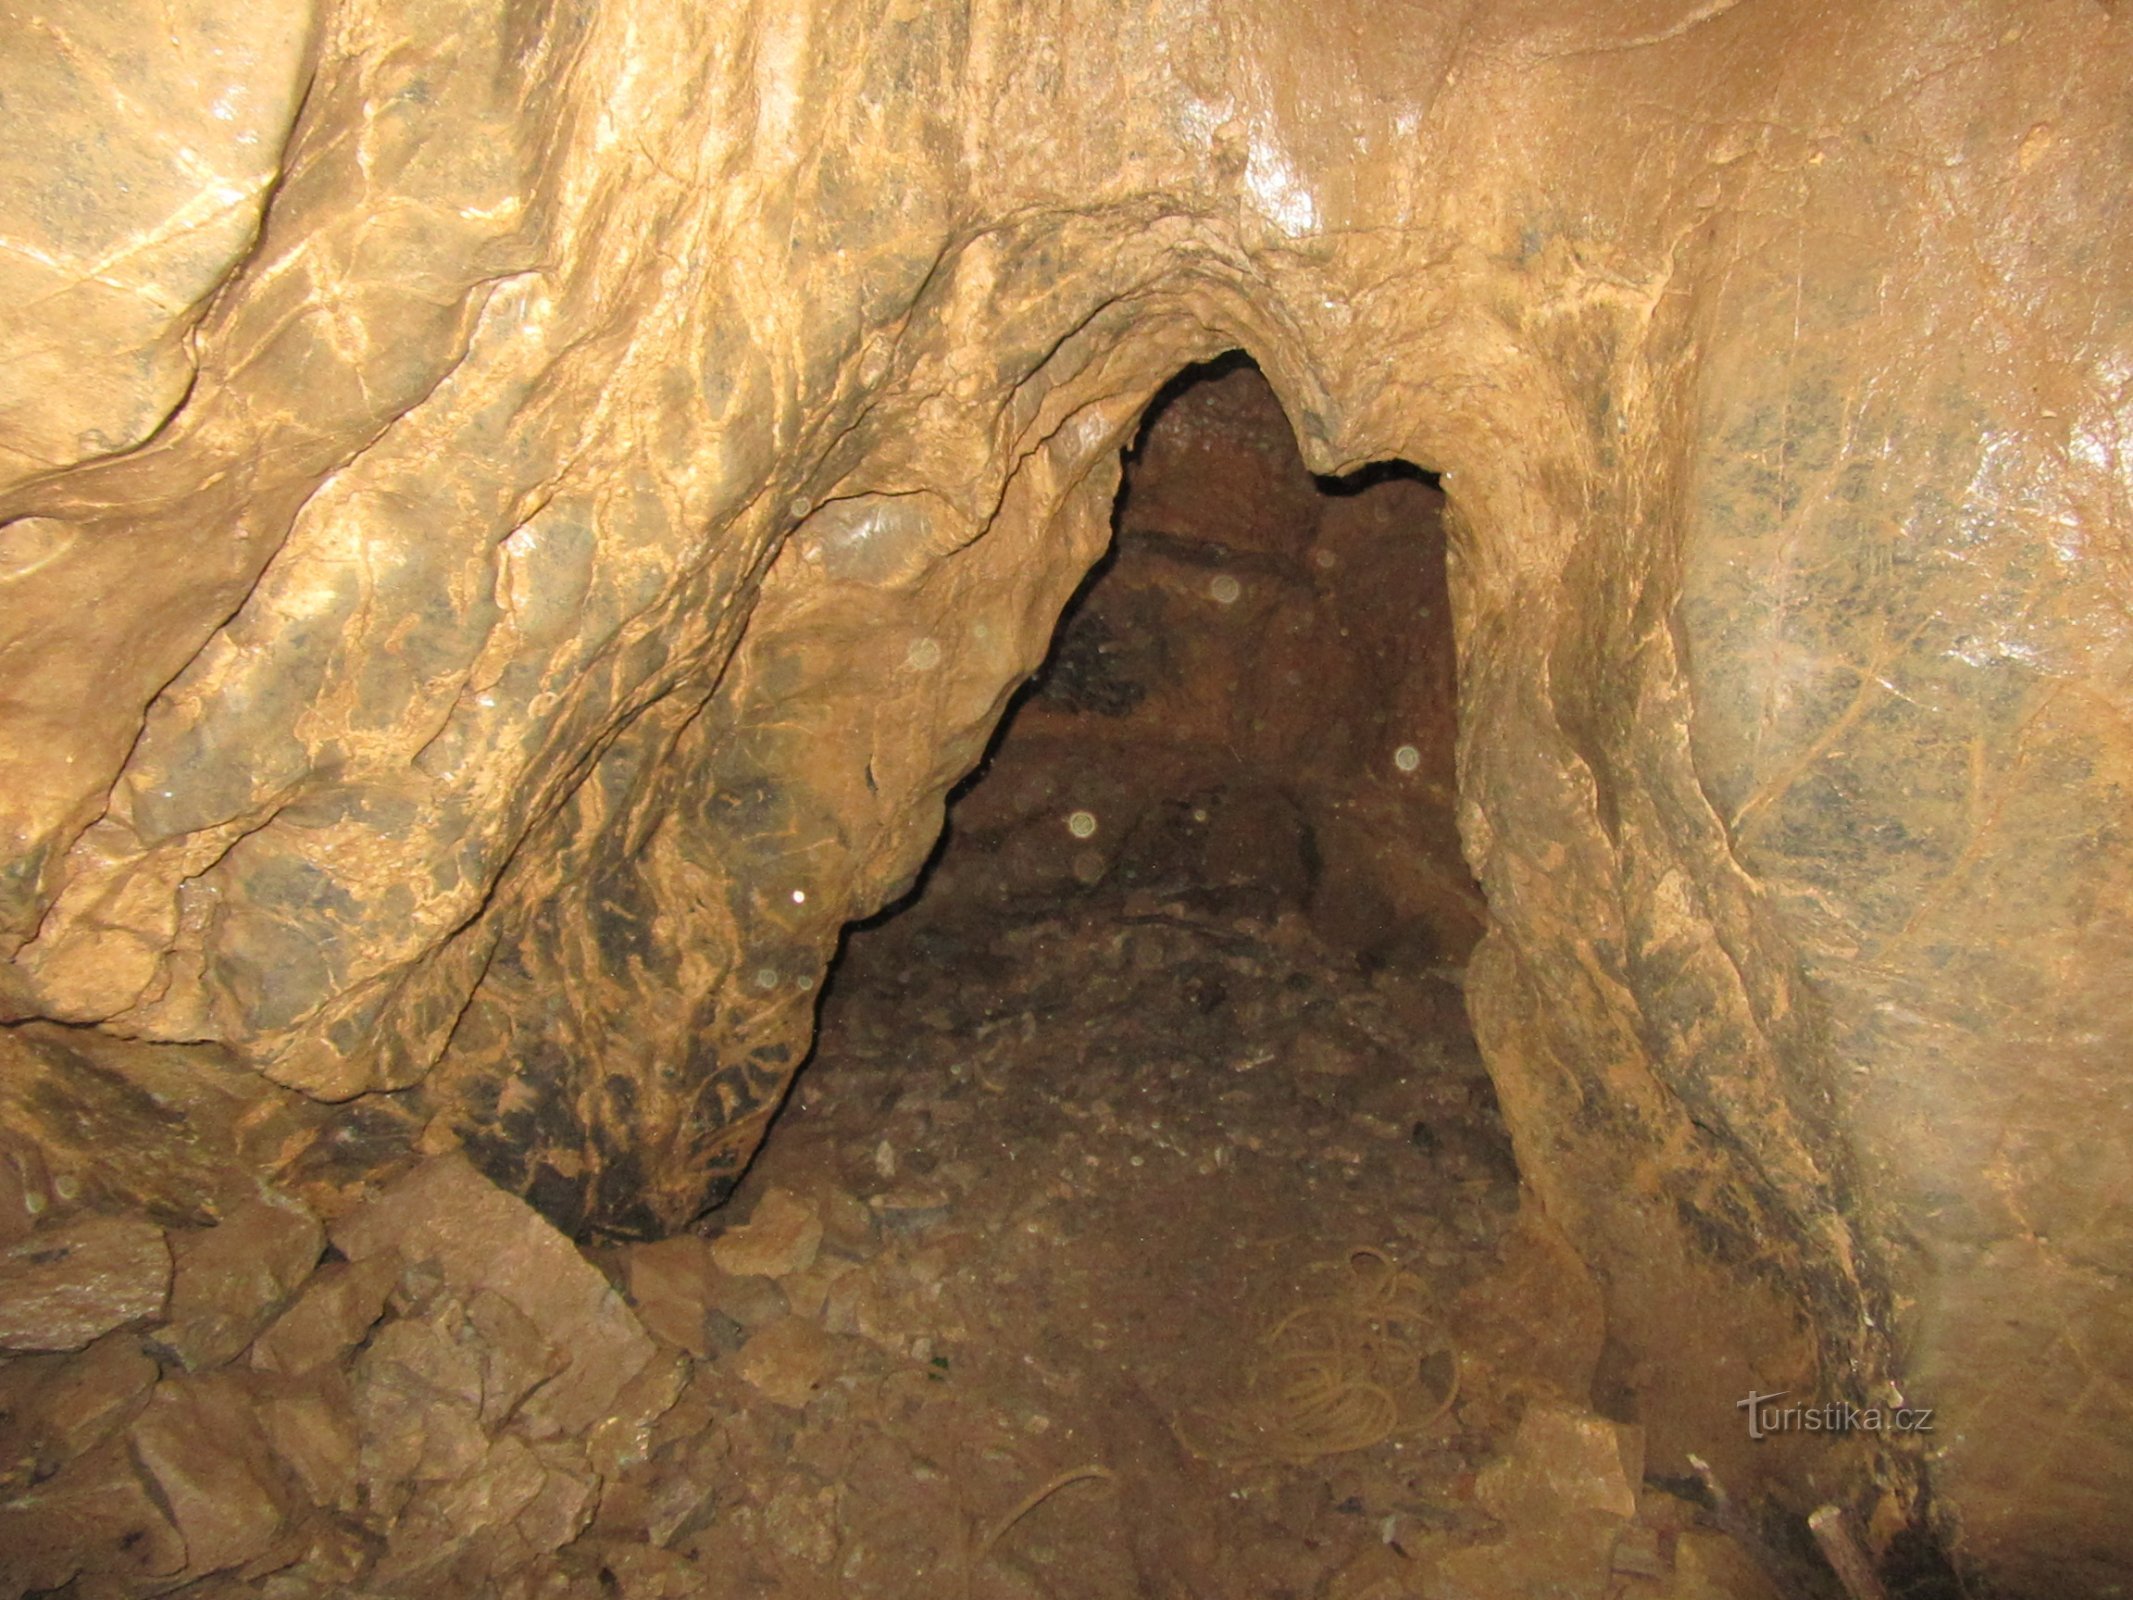 One of the cave corridors